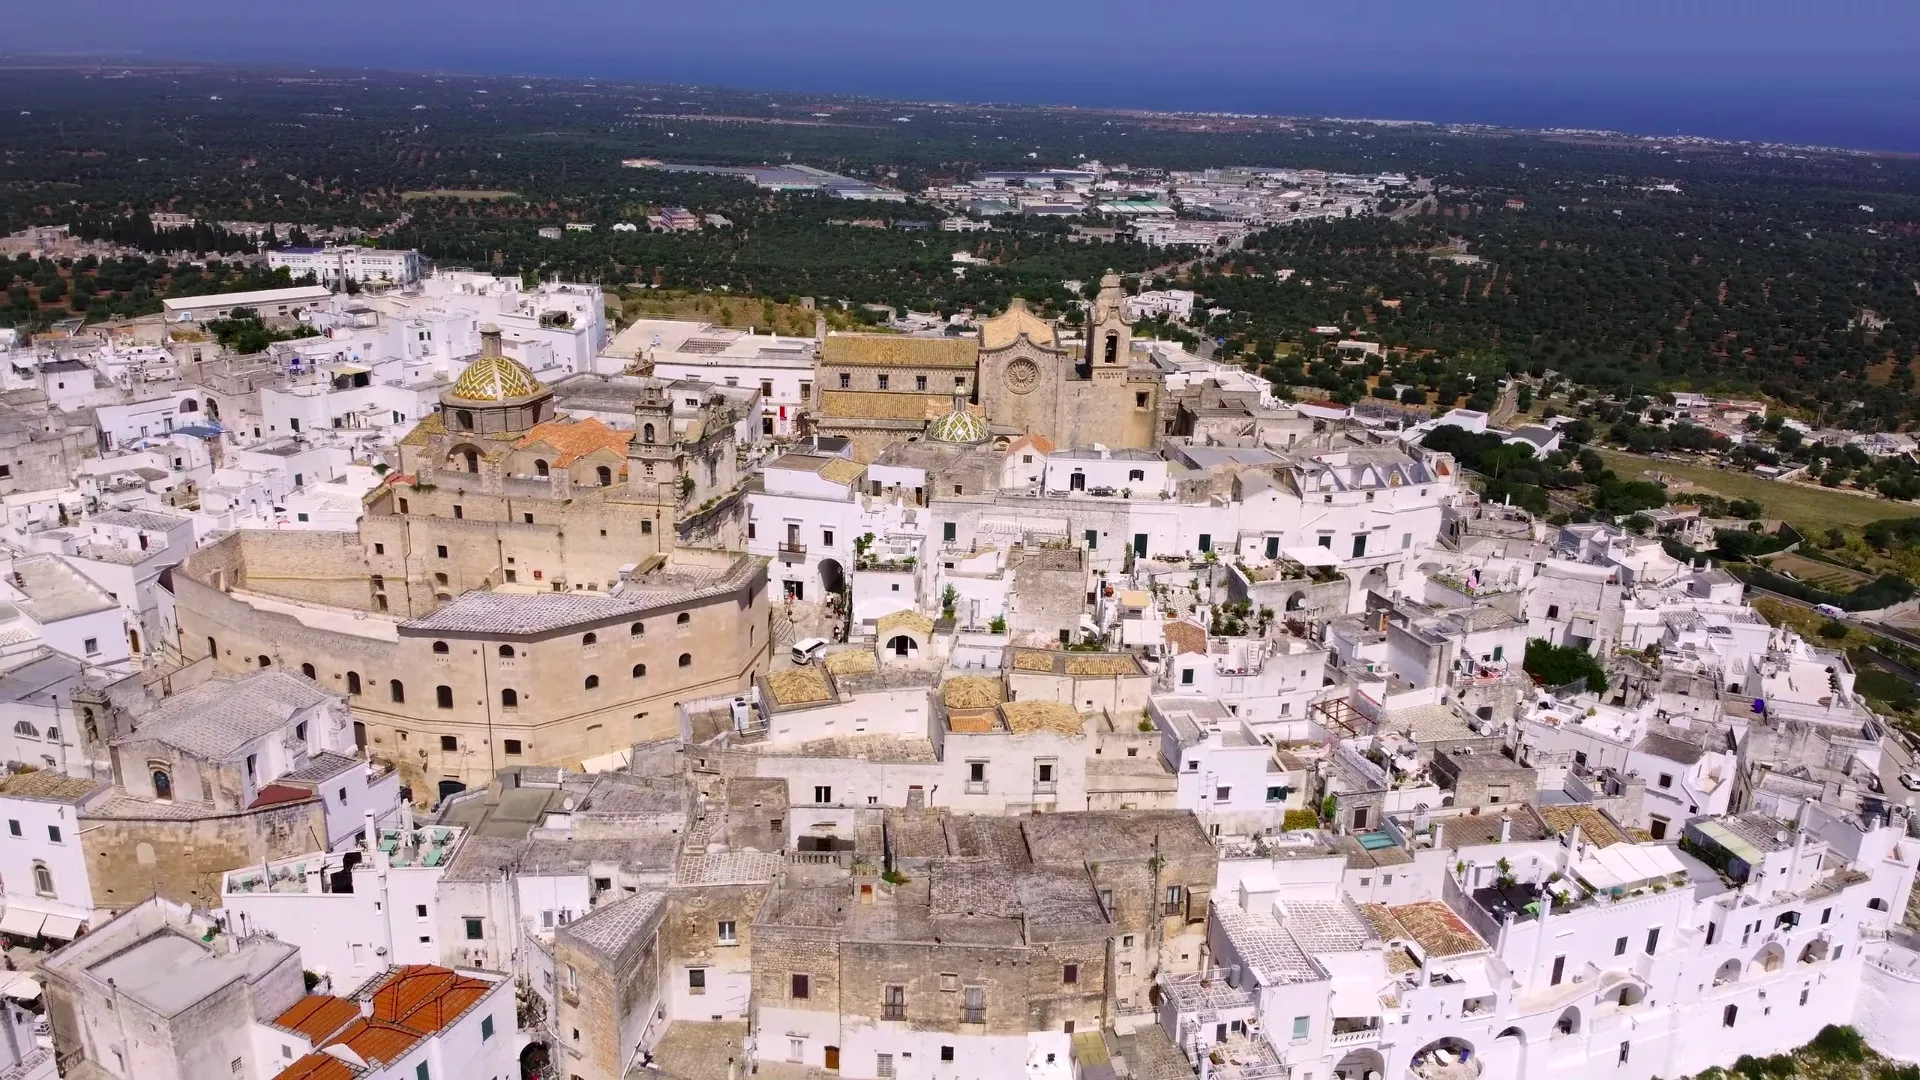 Ostuni center, aerial view of the historic center with olive groves and sea in the background